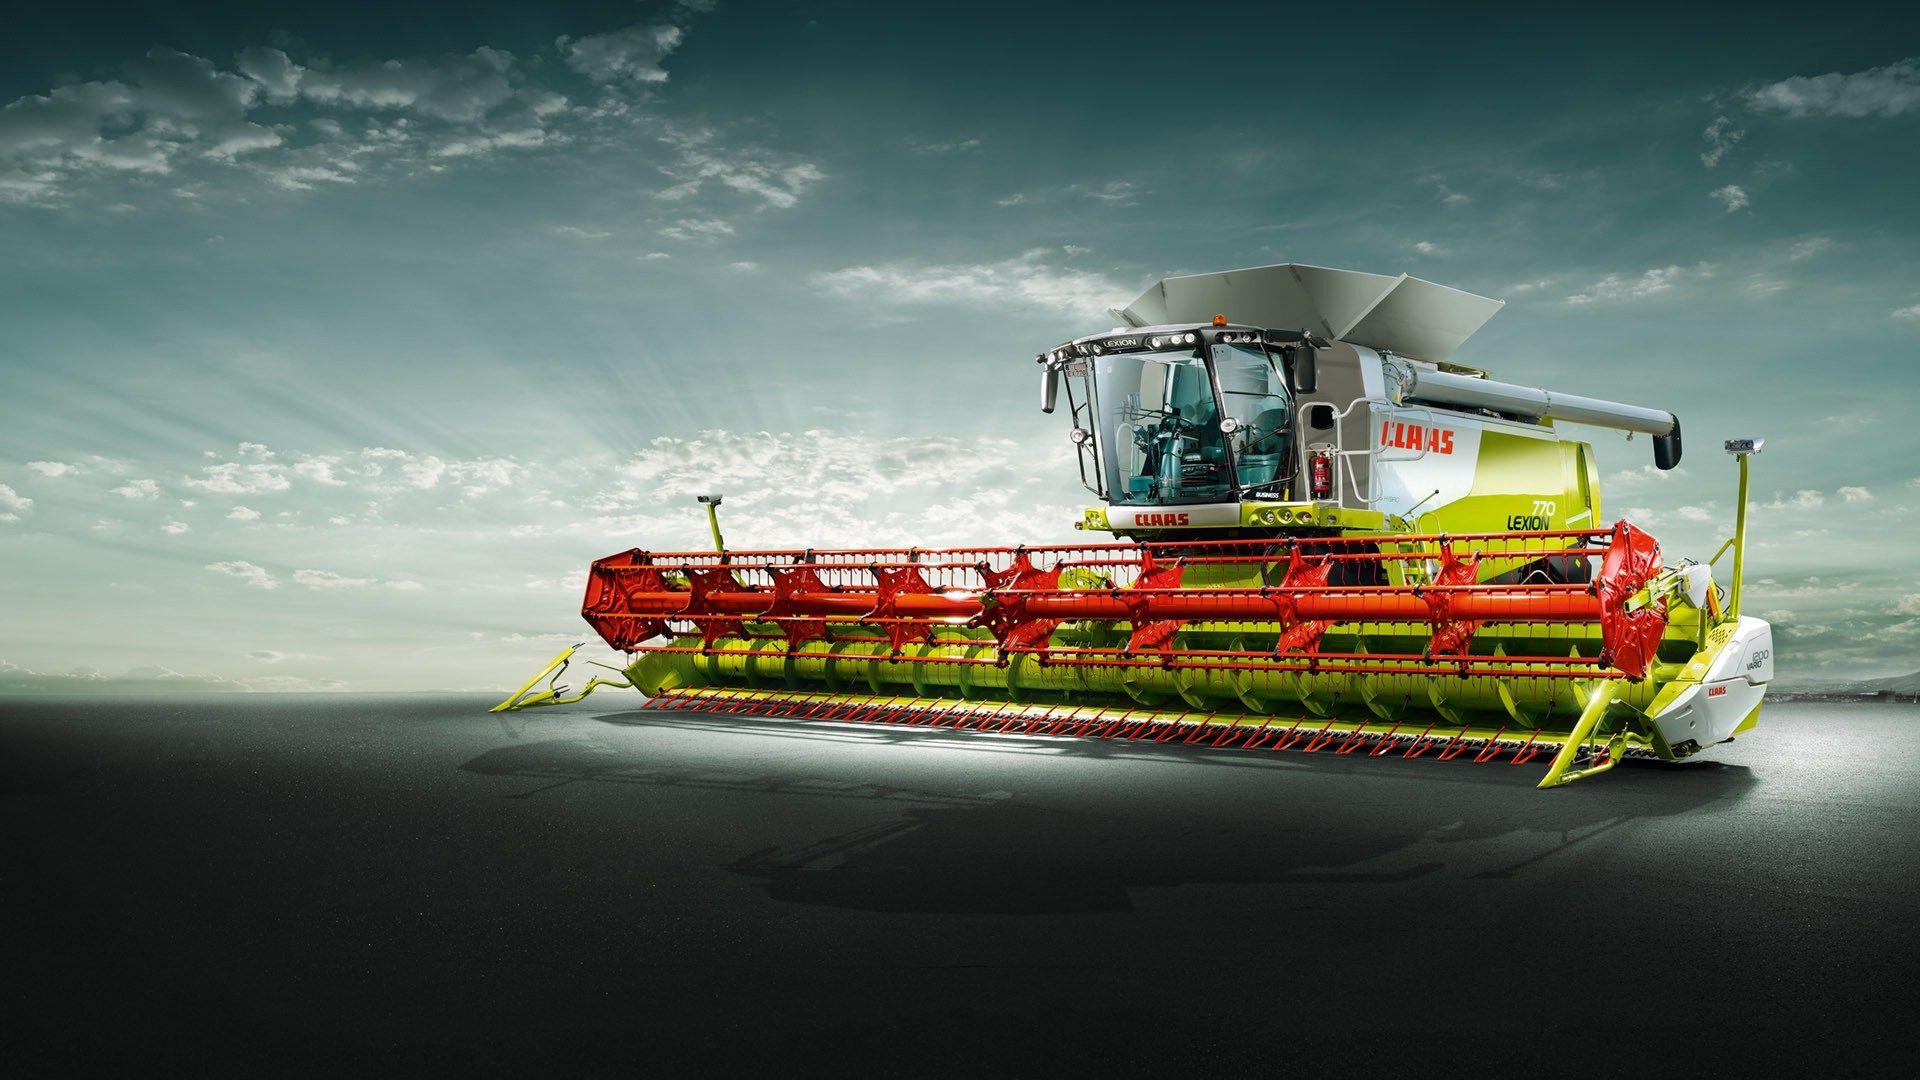 Claas Wallpaper Claas Modern 100% Quality HD Picture